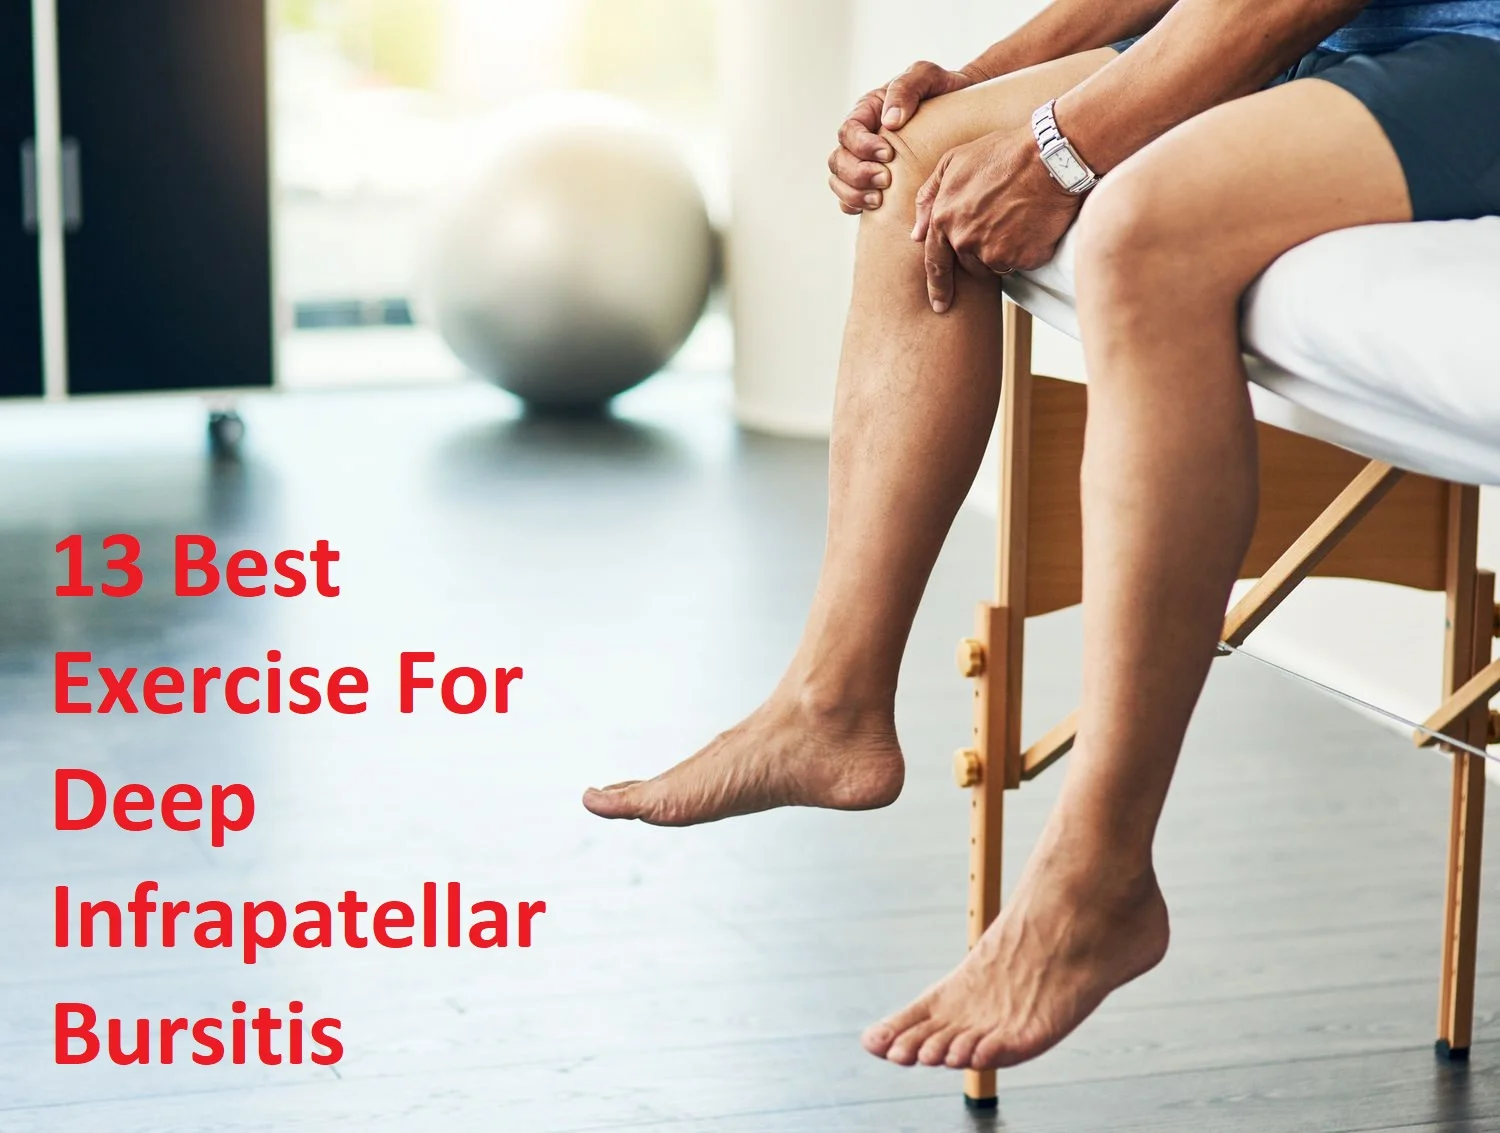 Exercise for Hip Bursitis - Mobile Physiotherapy Clinic